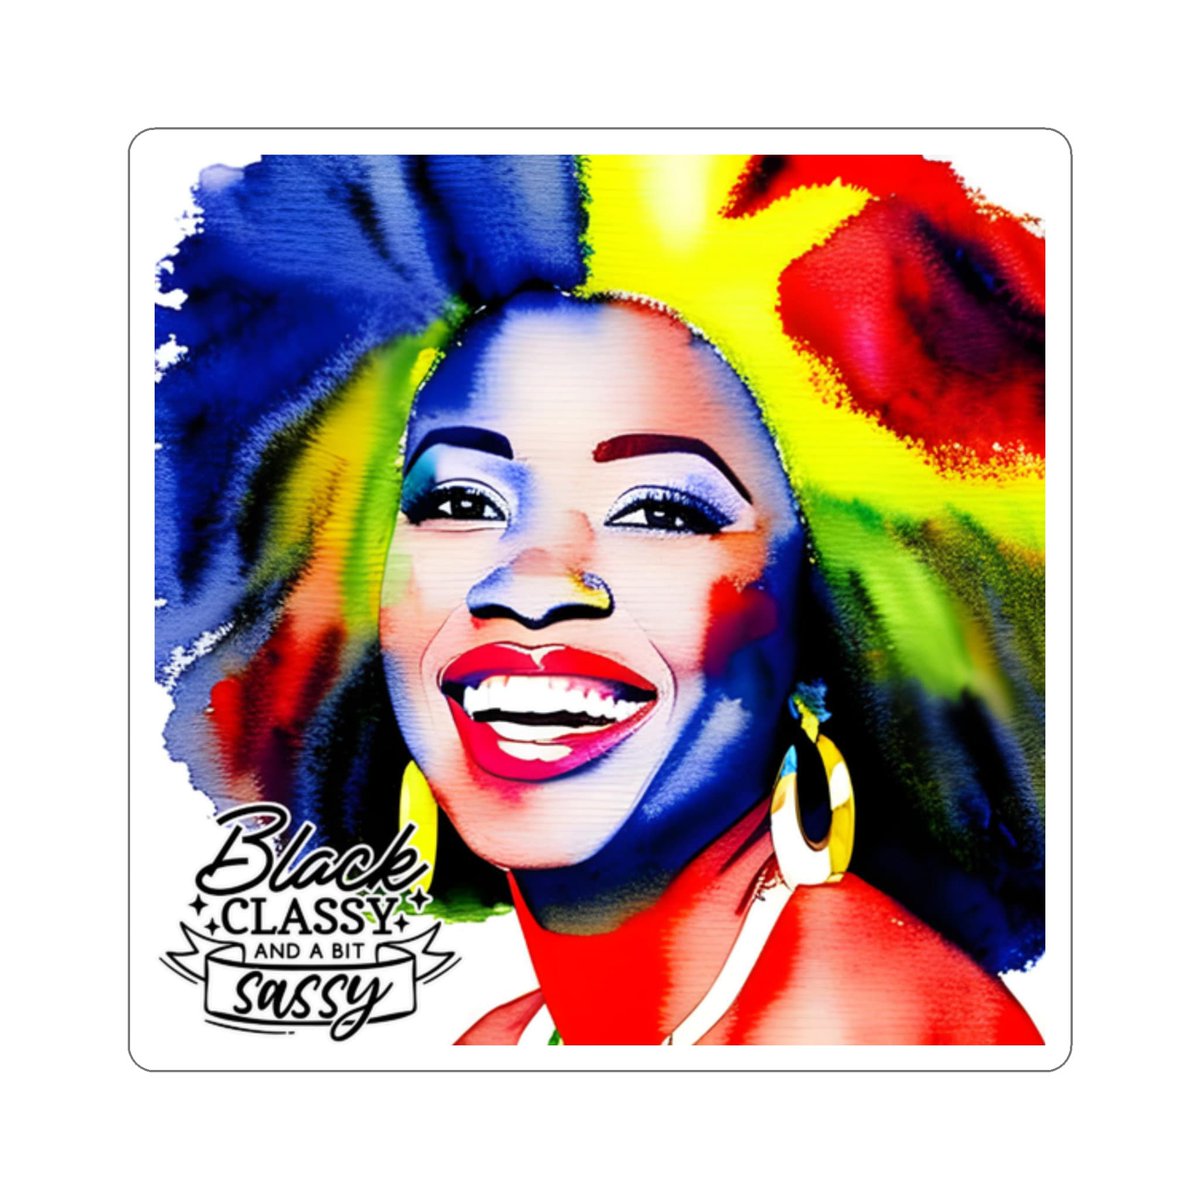 🐣. Offer Xtras! Black Classy and a Bit Sassy : African American Woman Empowerment Stickers for $3.48 #blackgirlplanner #stickers